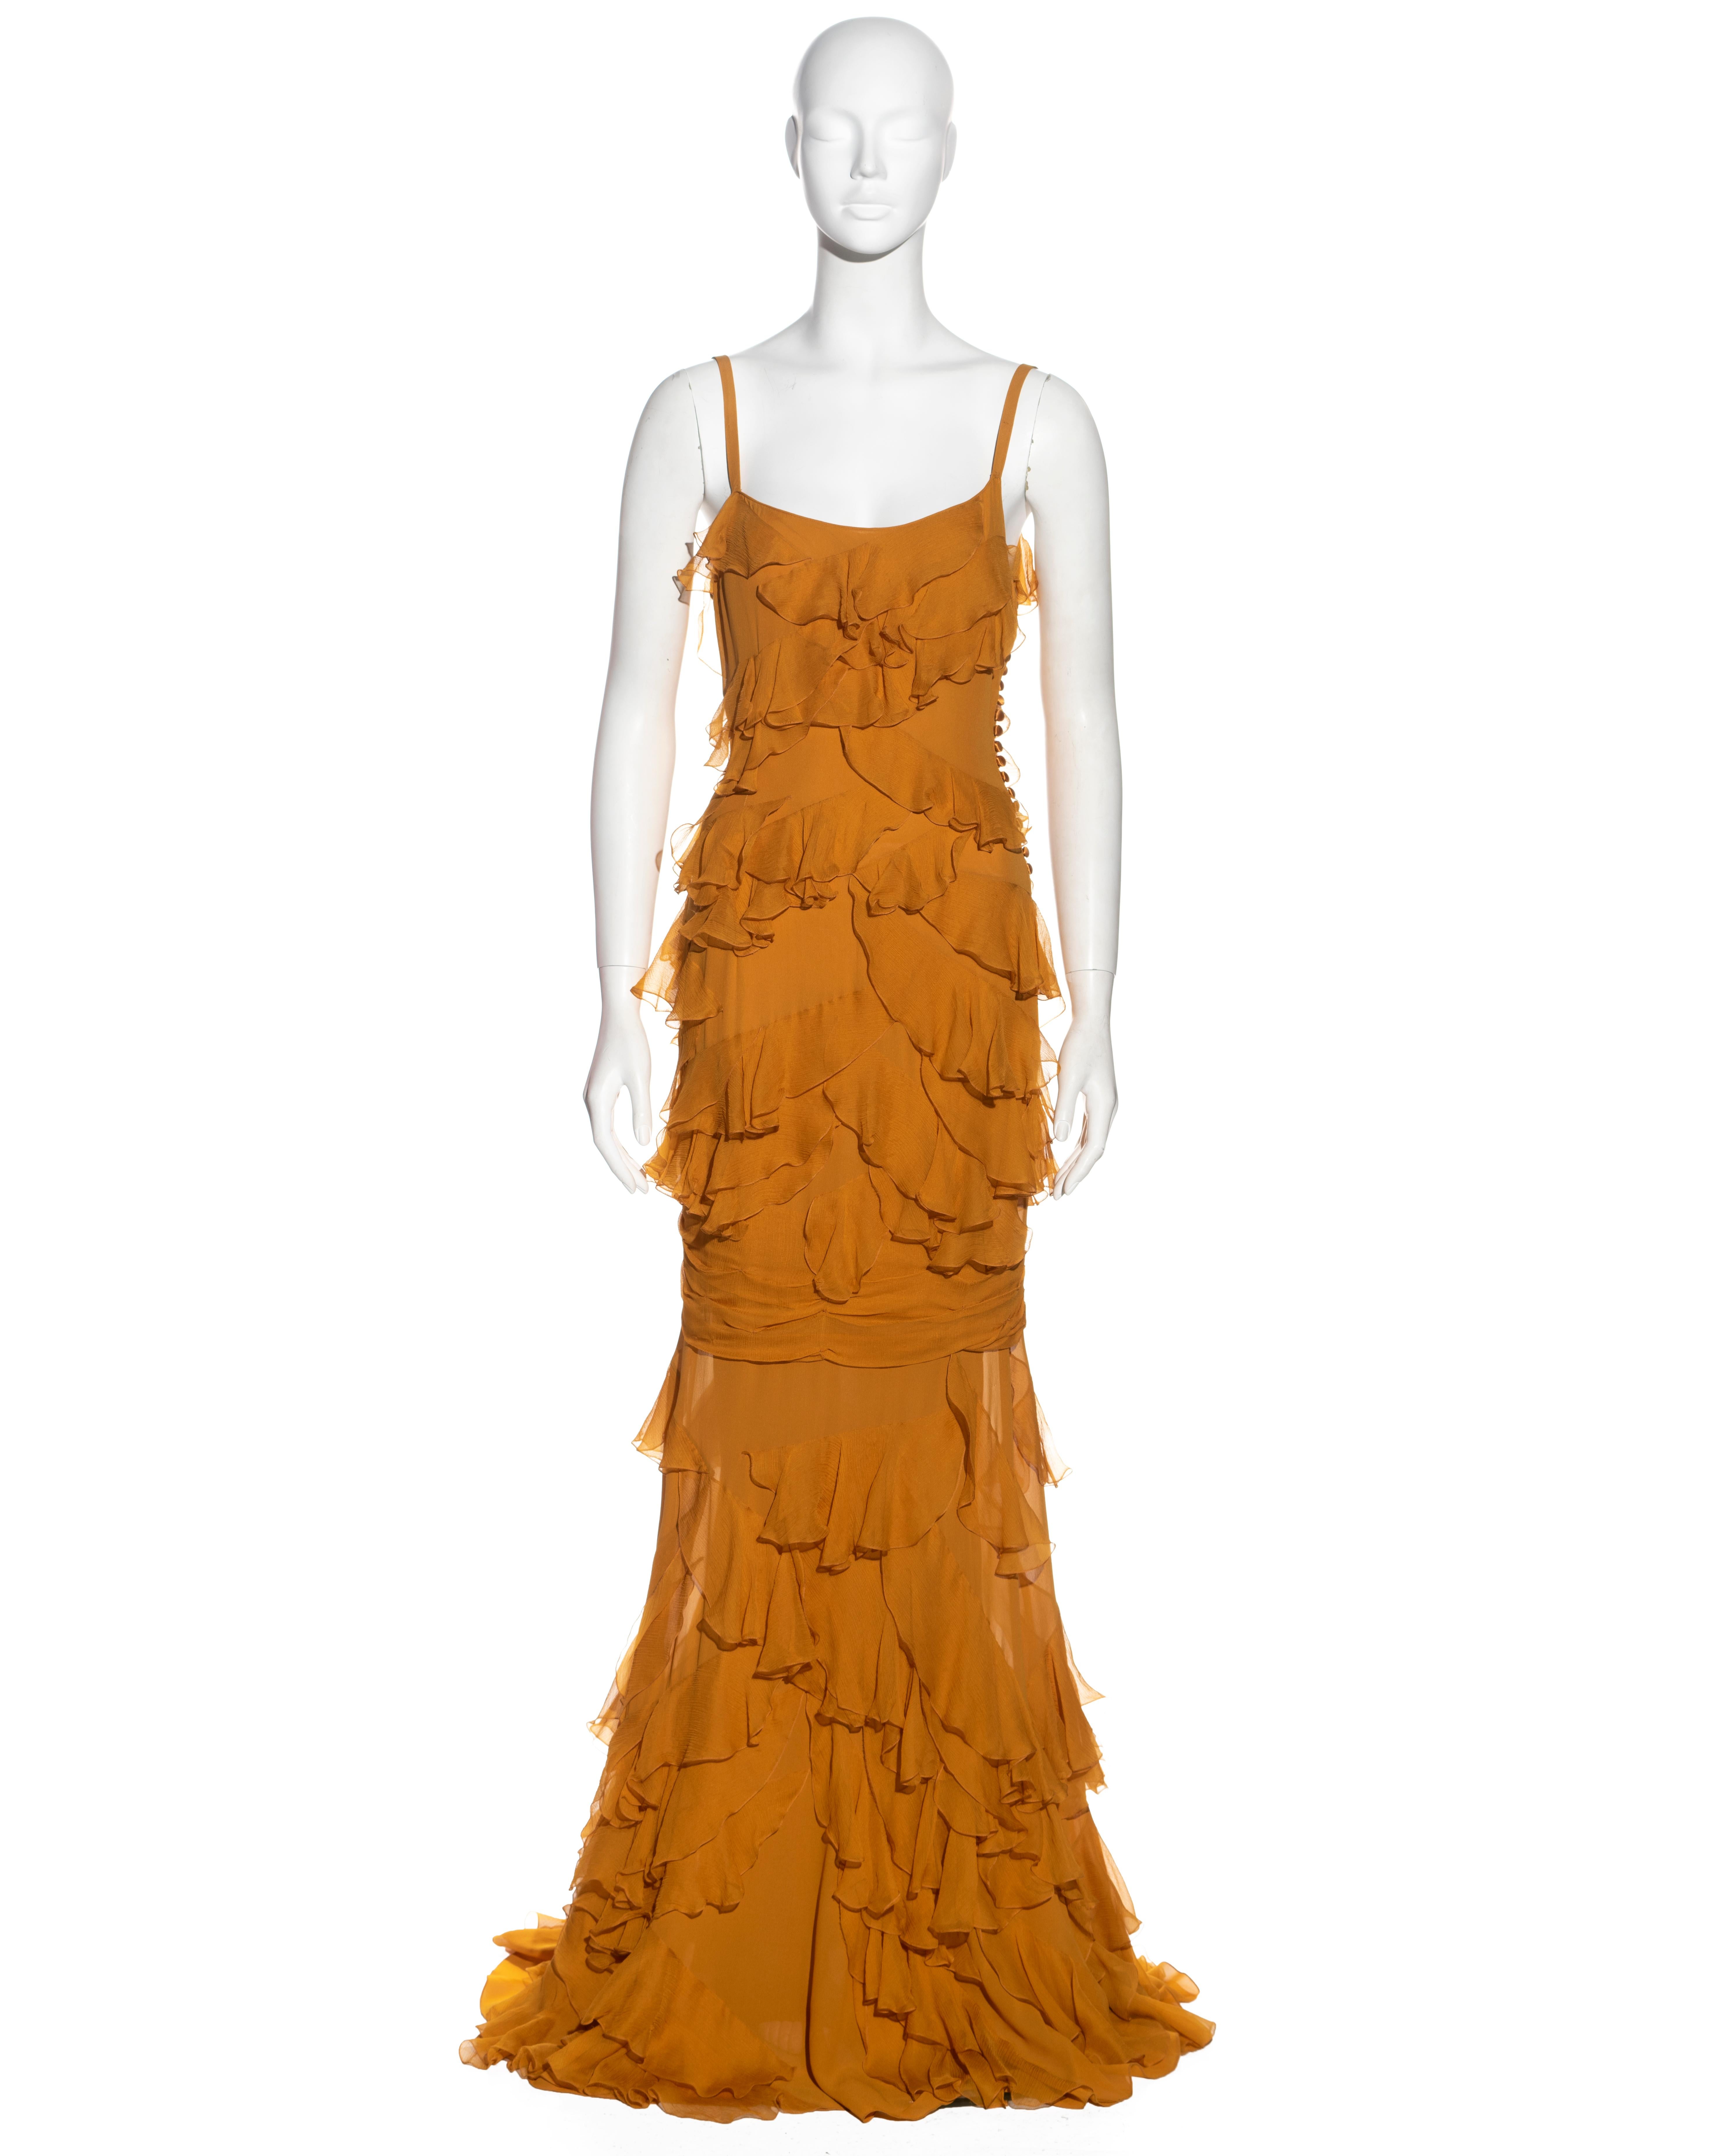 ▪ John Galliano evening dress
▪ Sold by One of a Kind Archive
▪ Constructed from saffron silk chiffon 
▪ Ruffled bias-cut trims 
▪ Floor-length skirt with train 
▪ Multiple decorative fabric buttons on the side seam
▪ FR 38 - UK 10 - US 6
▪